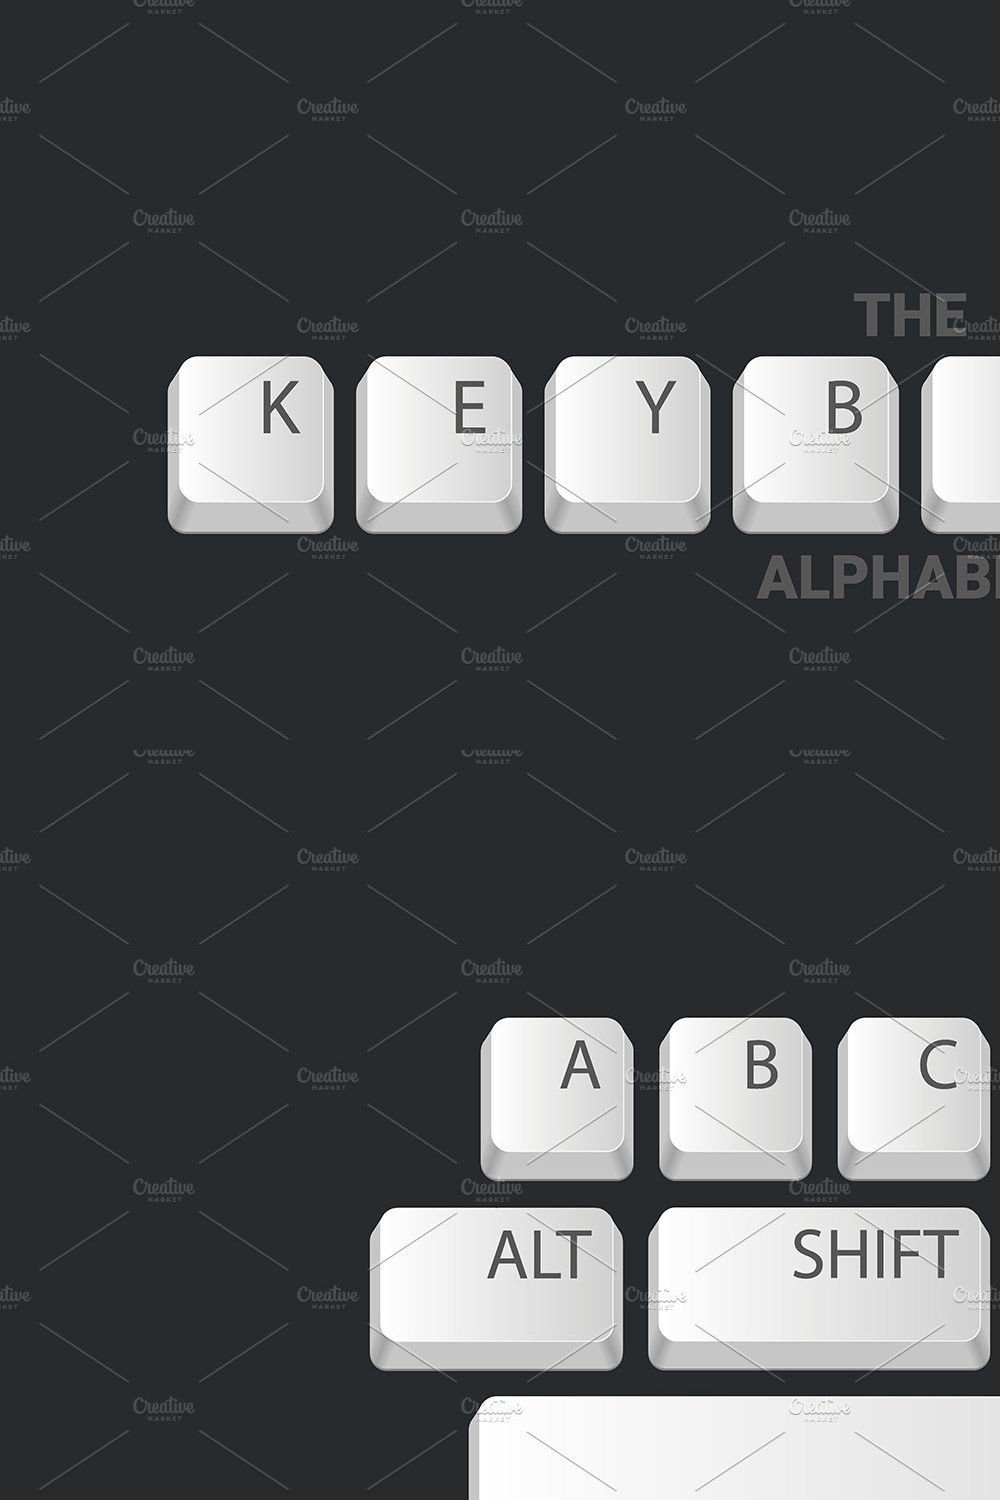 The Keyboard Alphabet and buttons pinterest preview image.